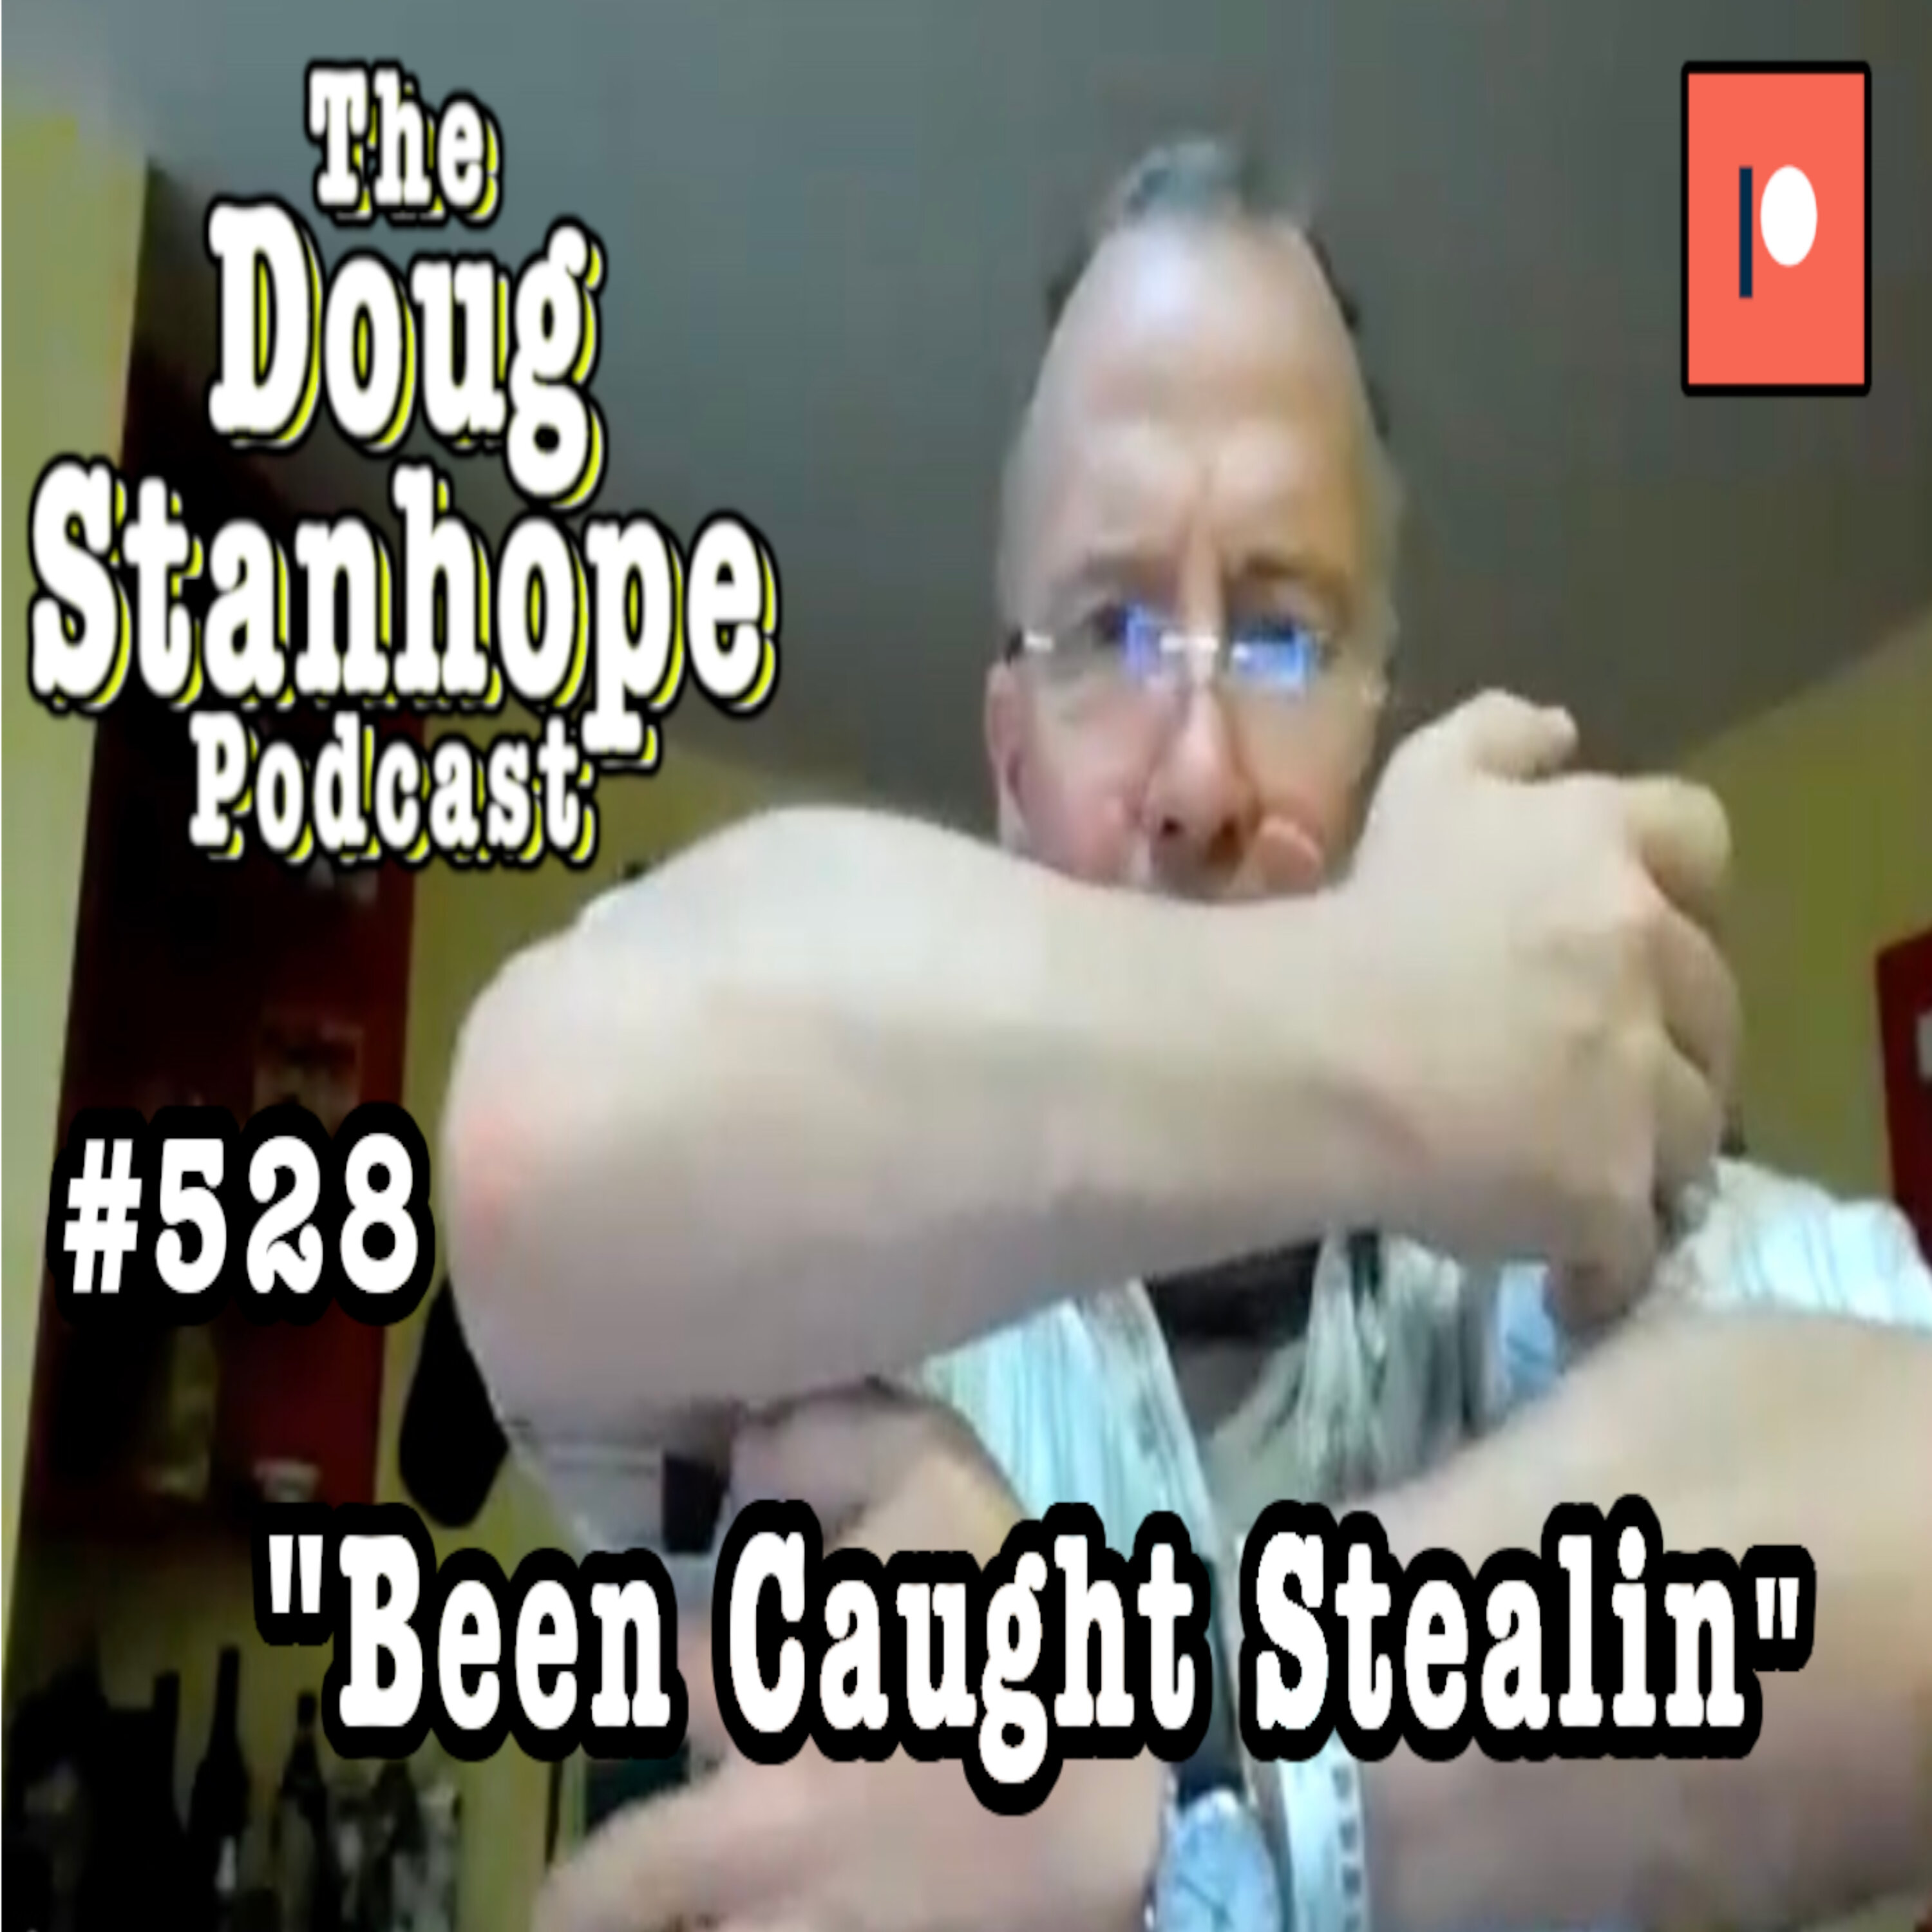 Doug Stanhope Podcast #528 - ”Been Caught Stealin”